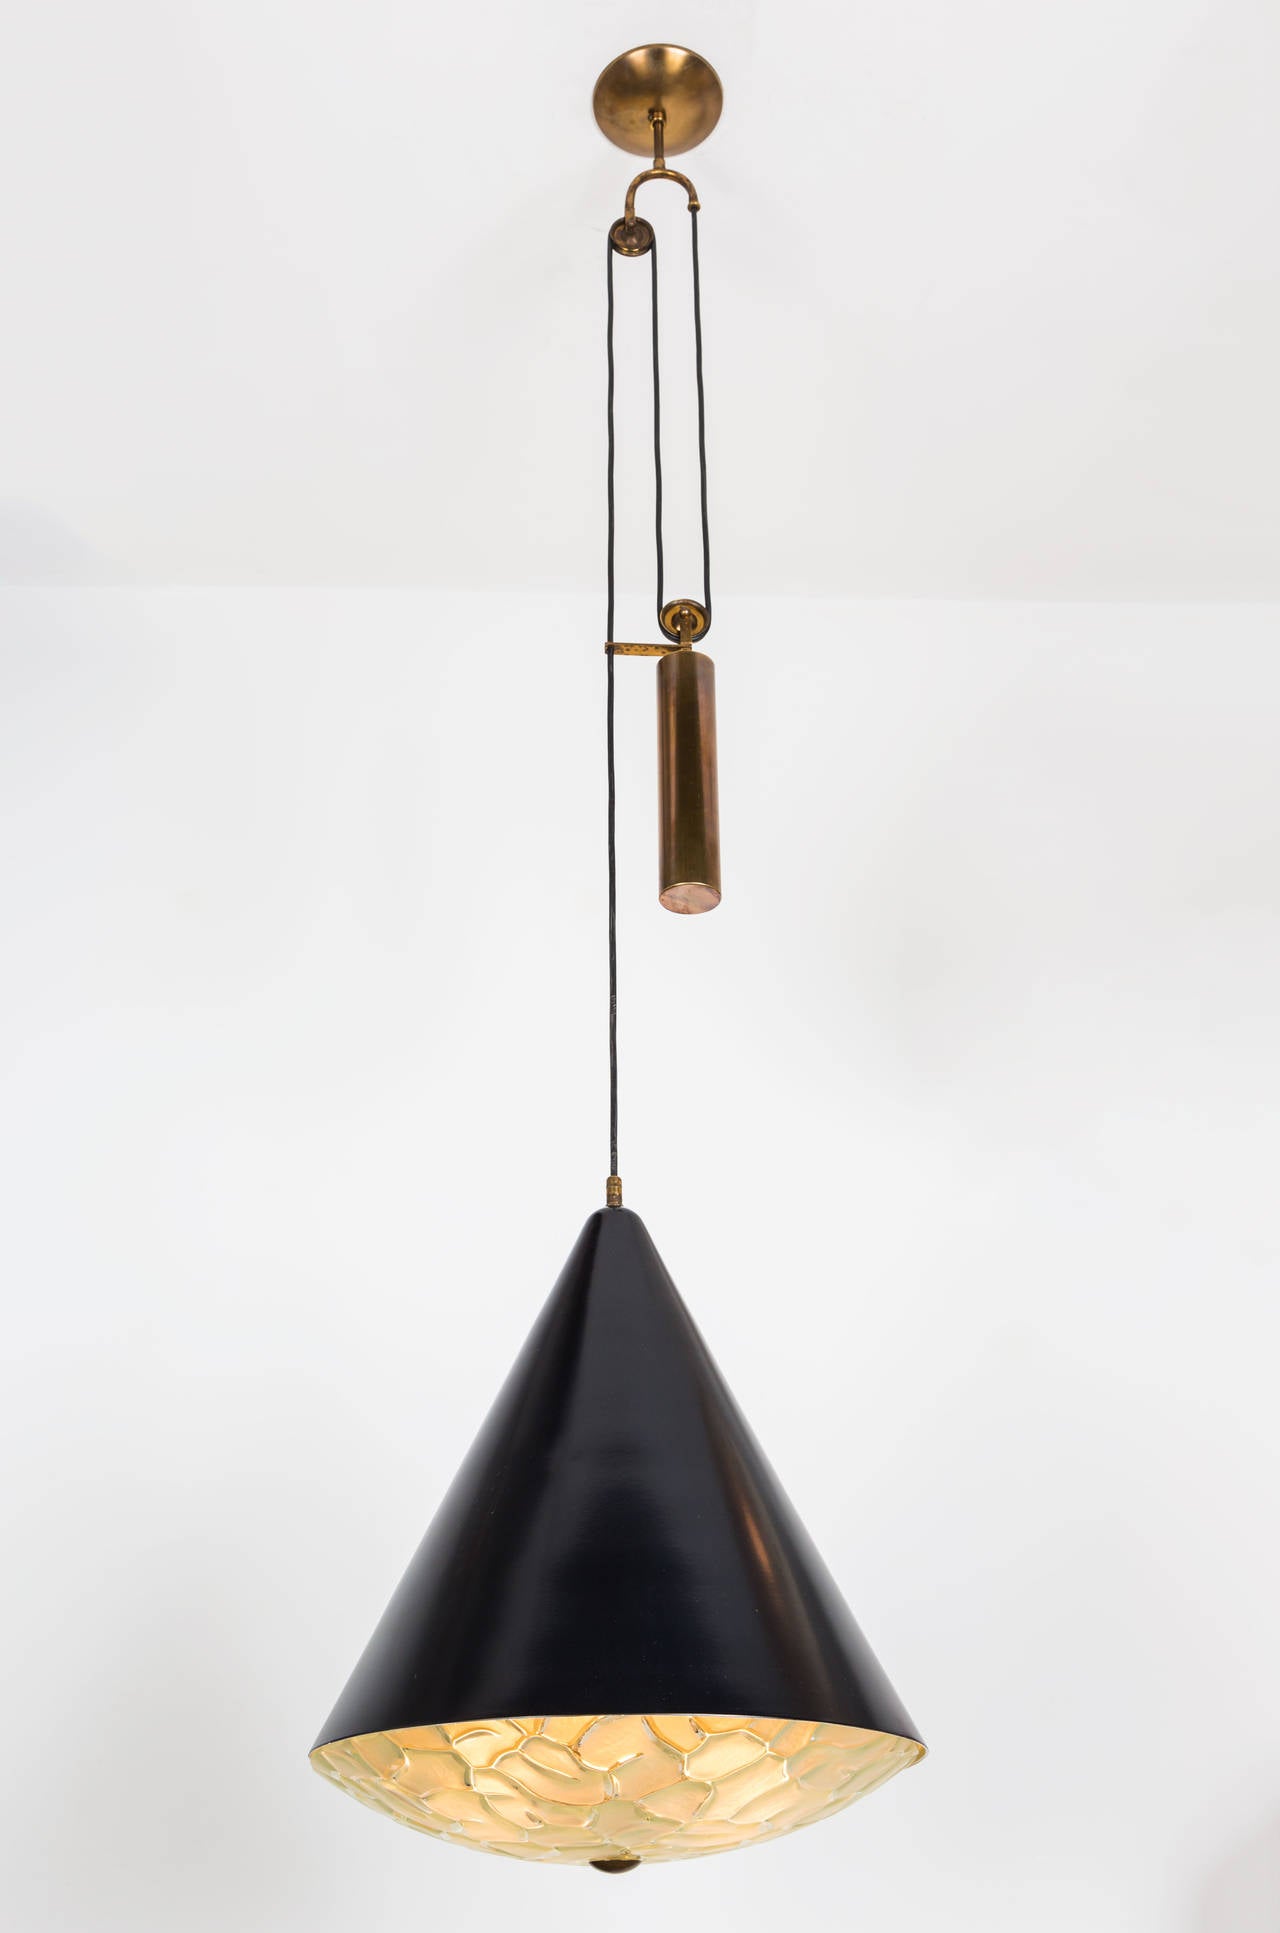 Painted metal and textured glass pendant with brass pulley.